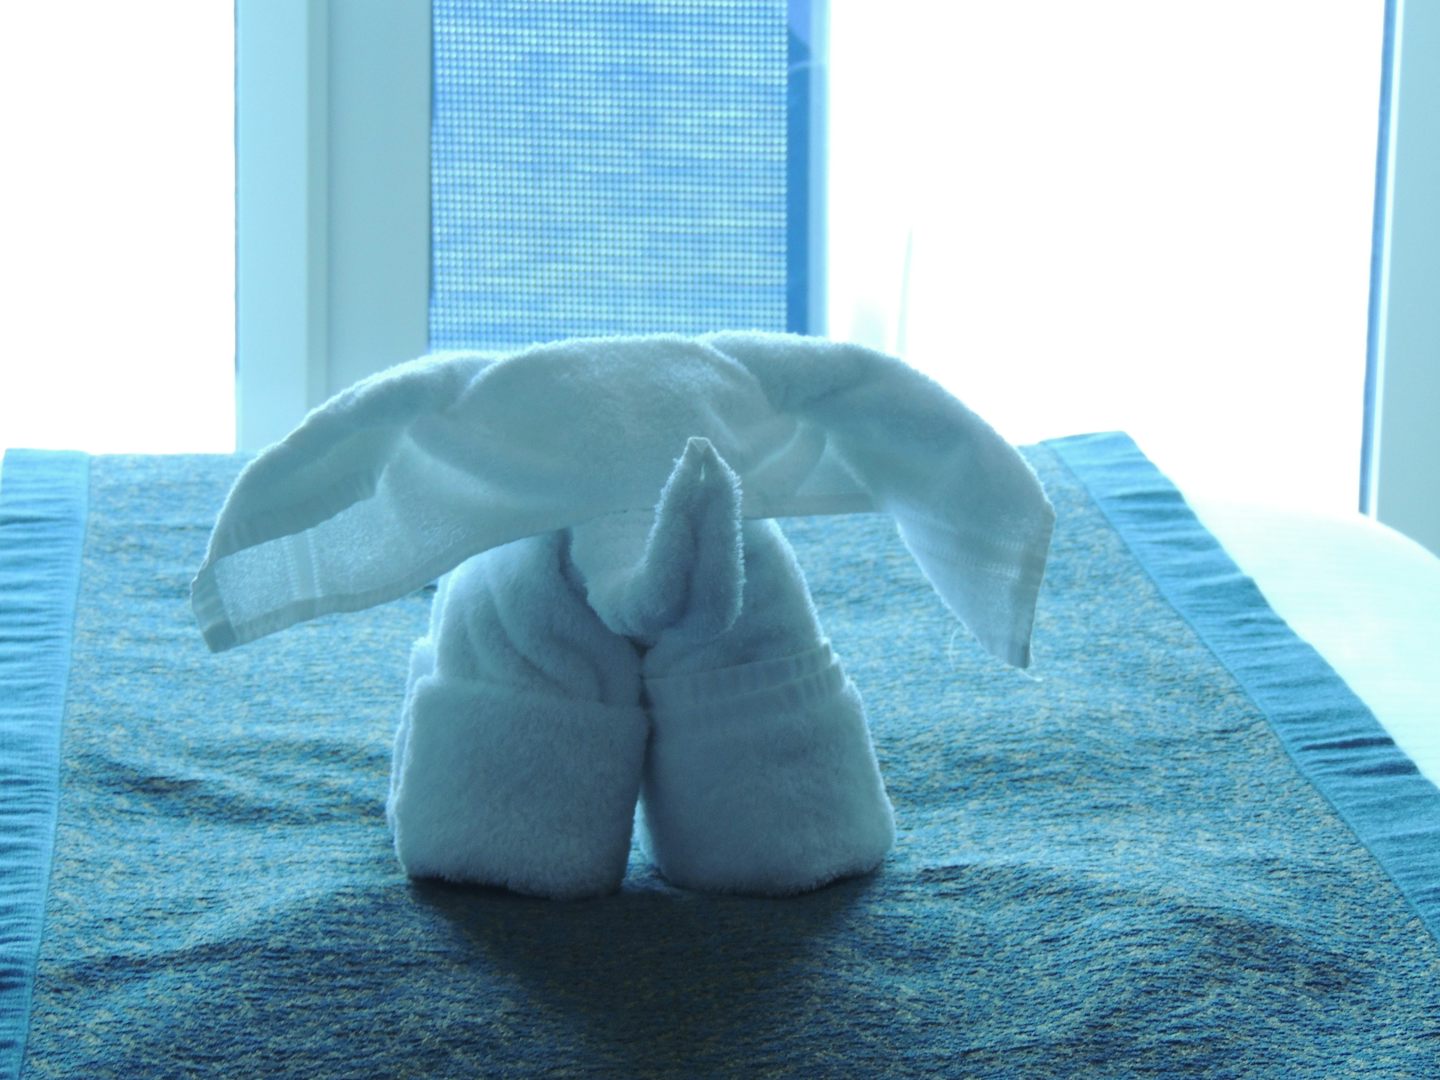 Towel animal in our cabin